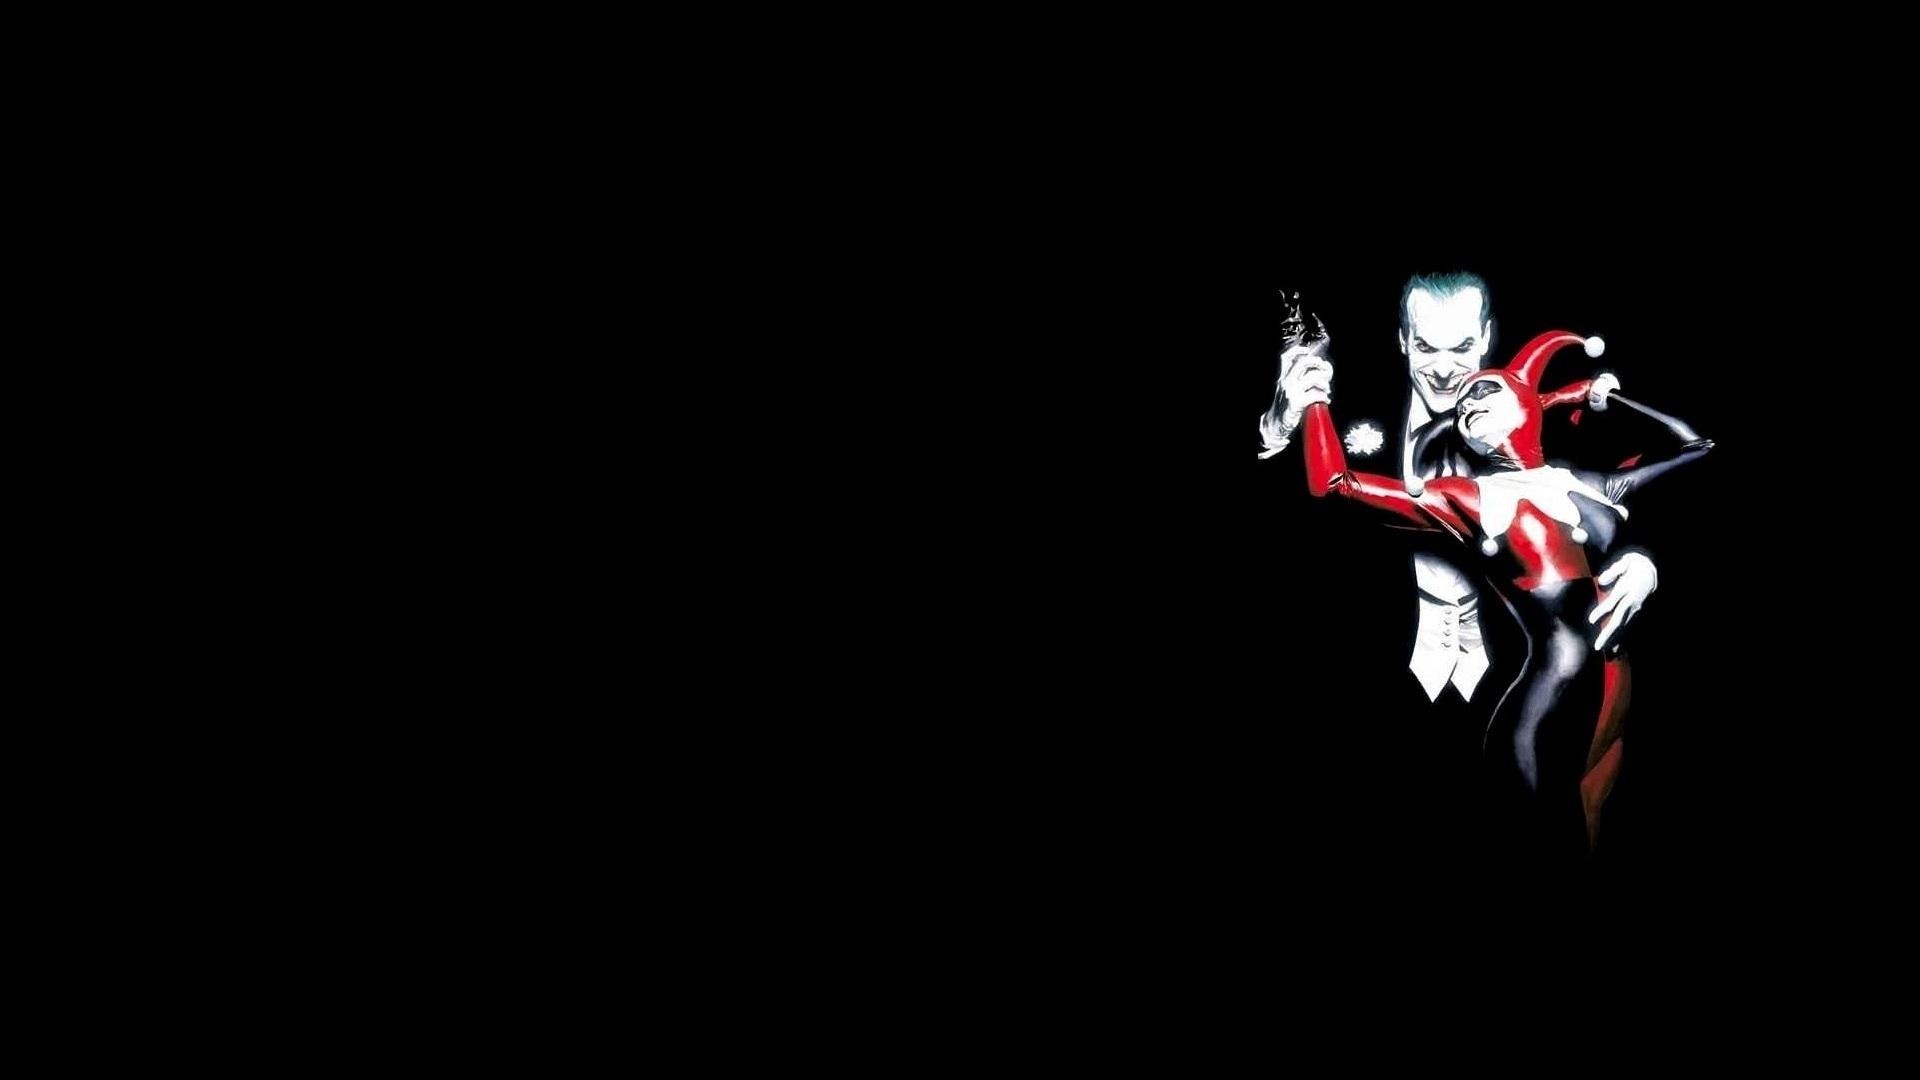 Joker And Harley HD Wallpaper With Resolution 1920X1080 pixel. You can make this wallpaper for your Desktop Computer Backgrounds, Mac Wallpapers, Android Lock screen or iPhone Screensavers